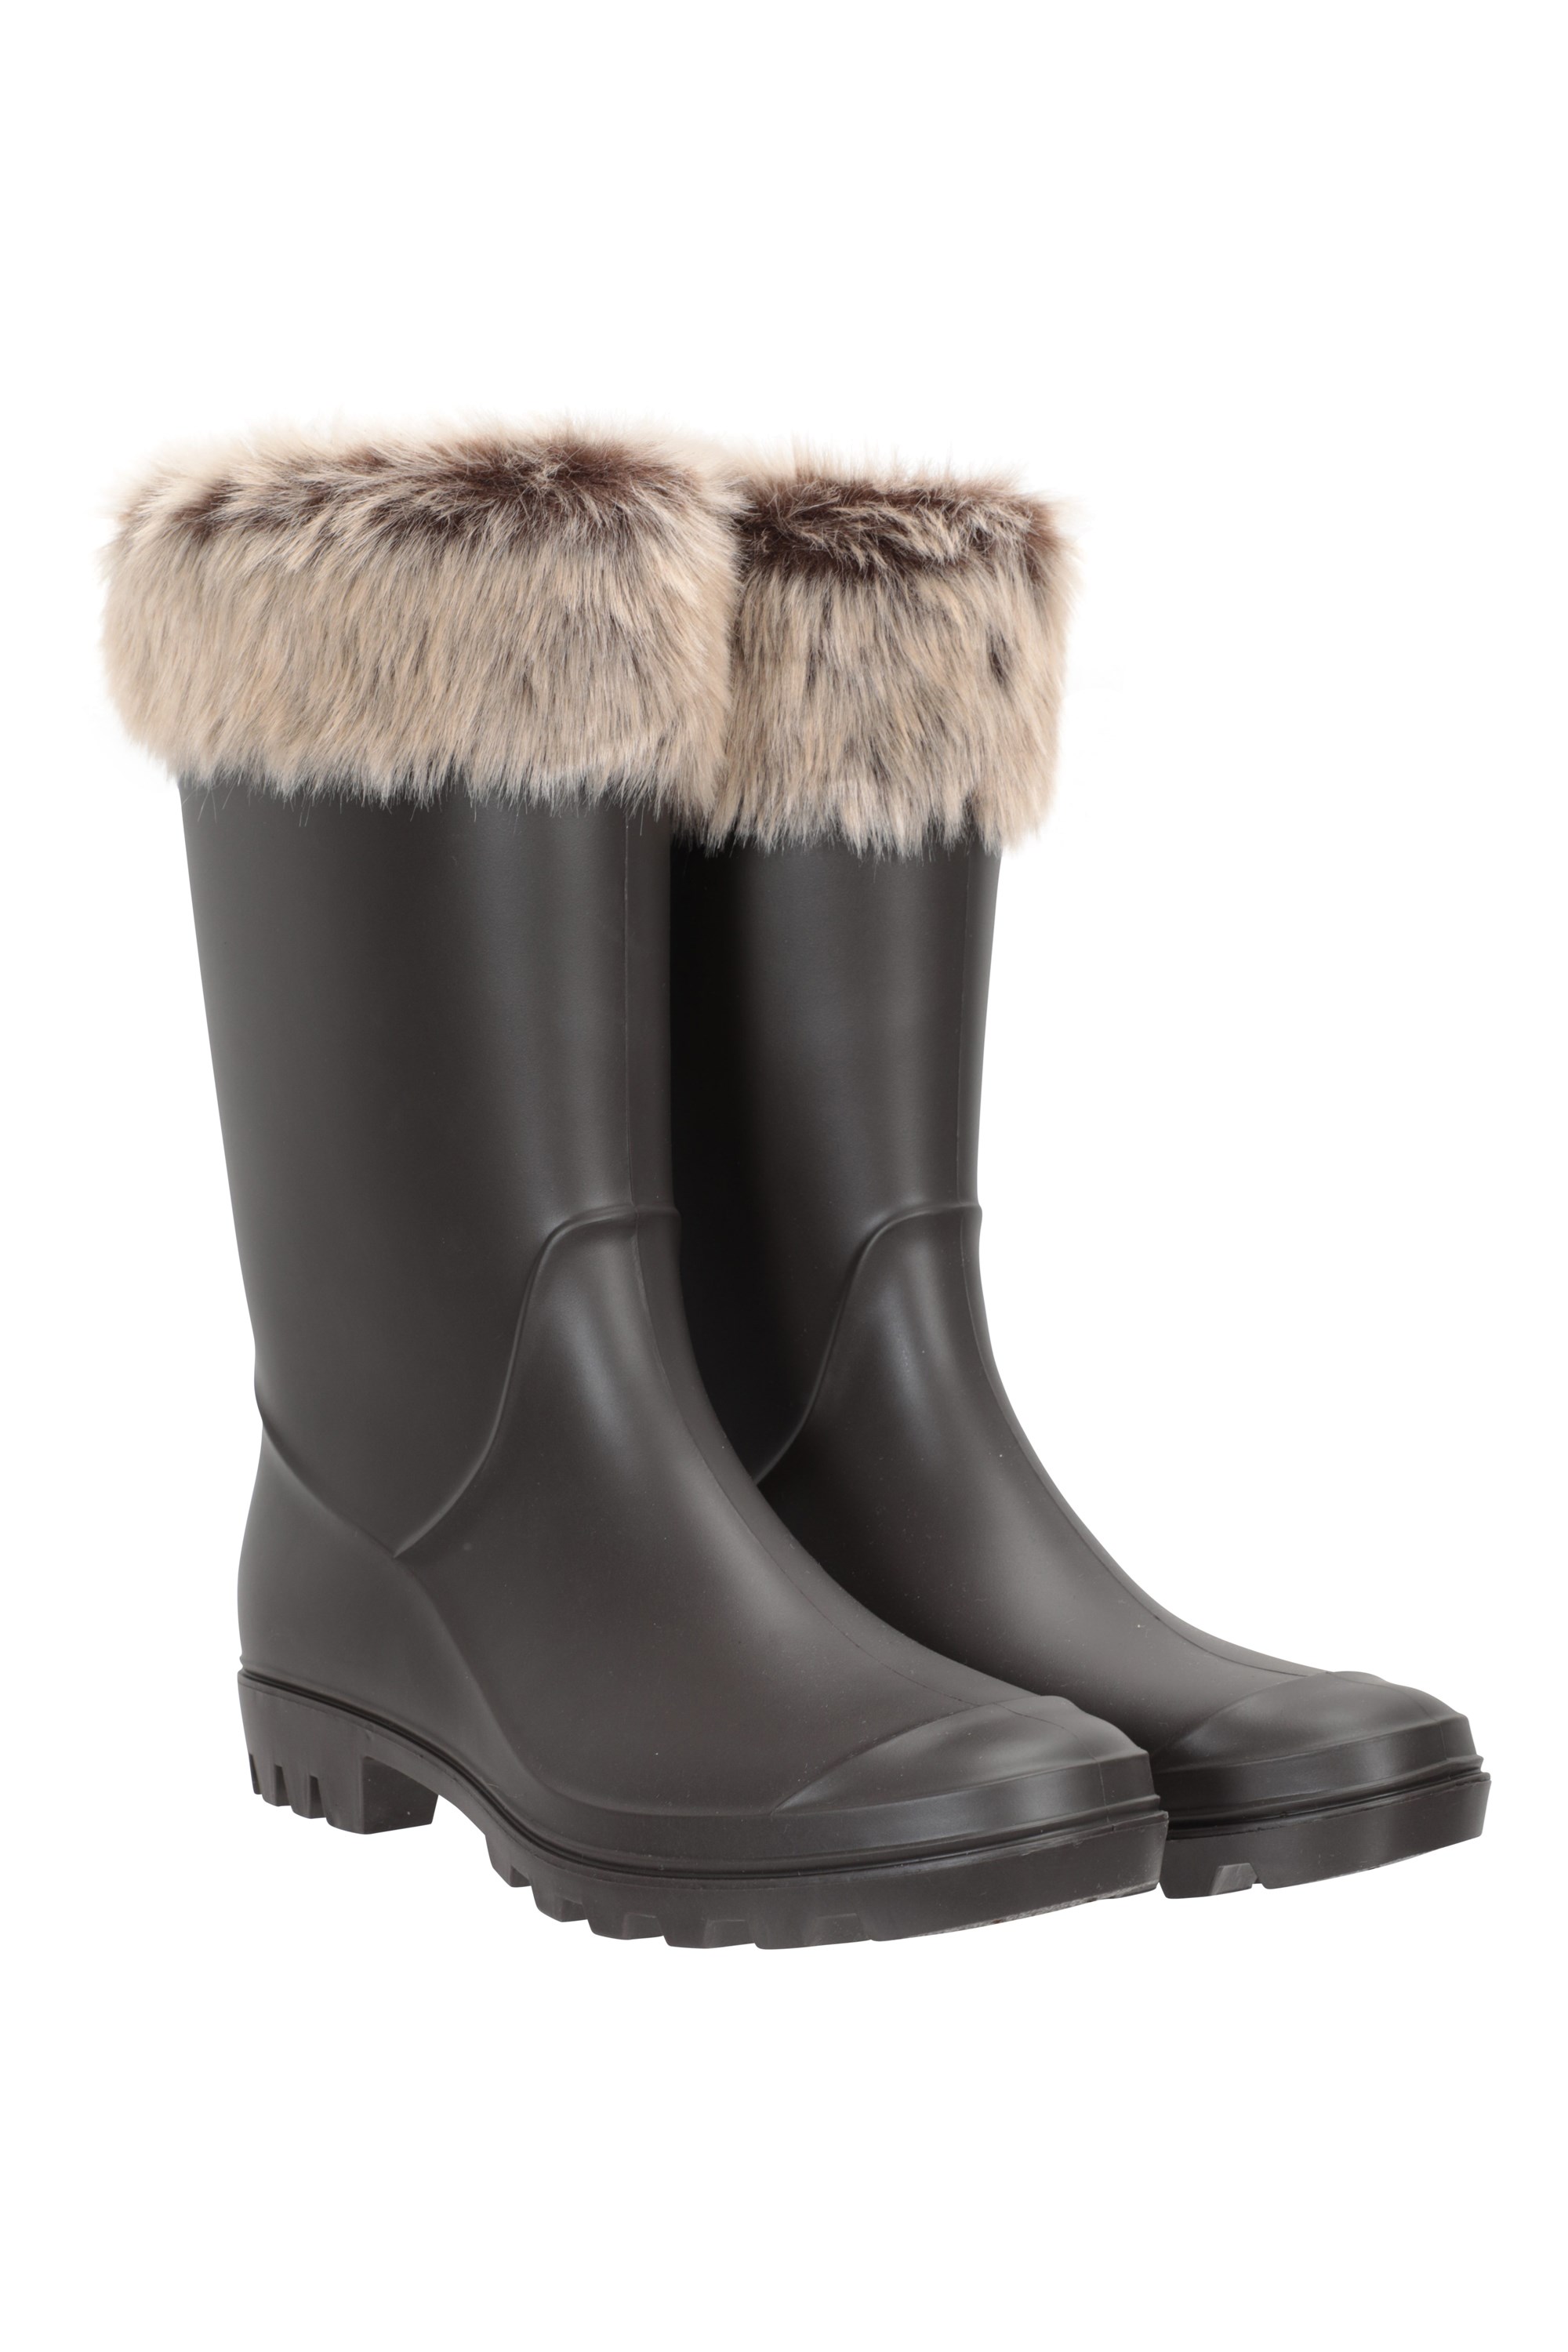 Fur Lined Womens Wellies | Mountain 